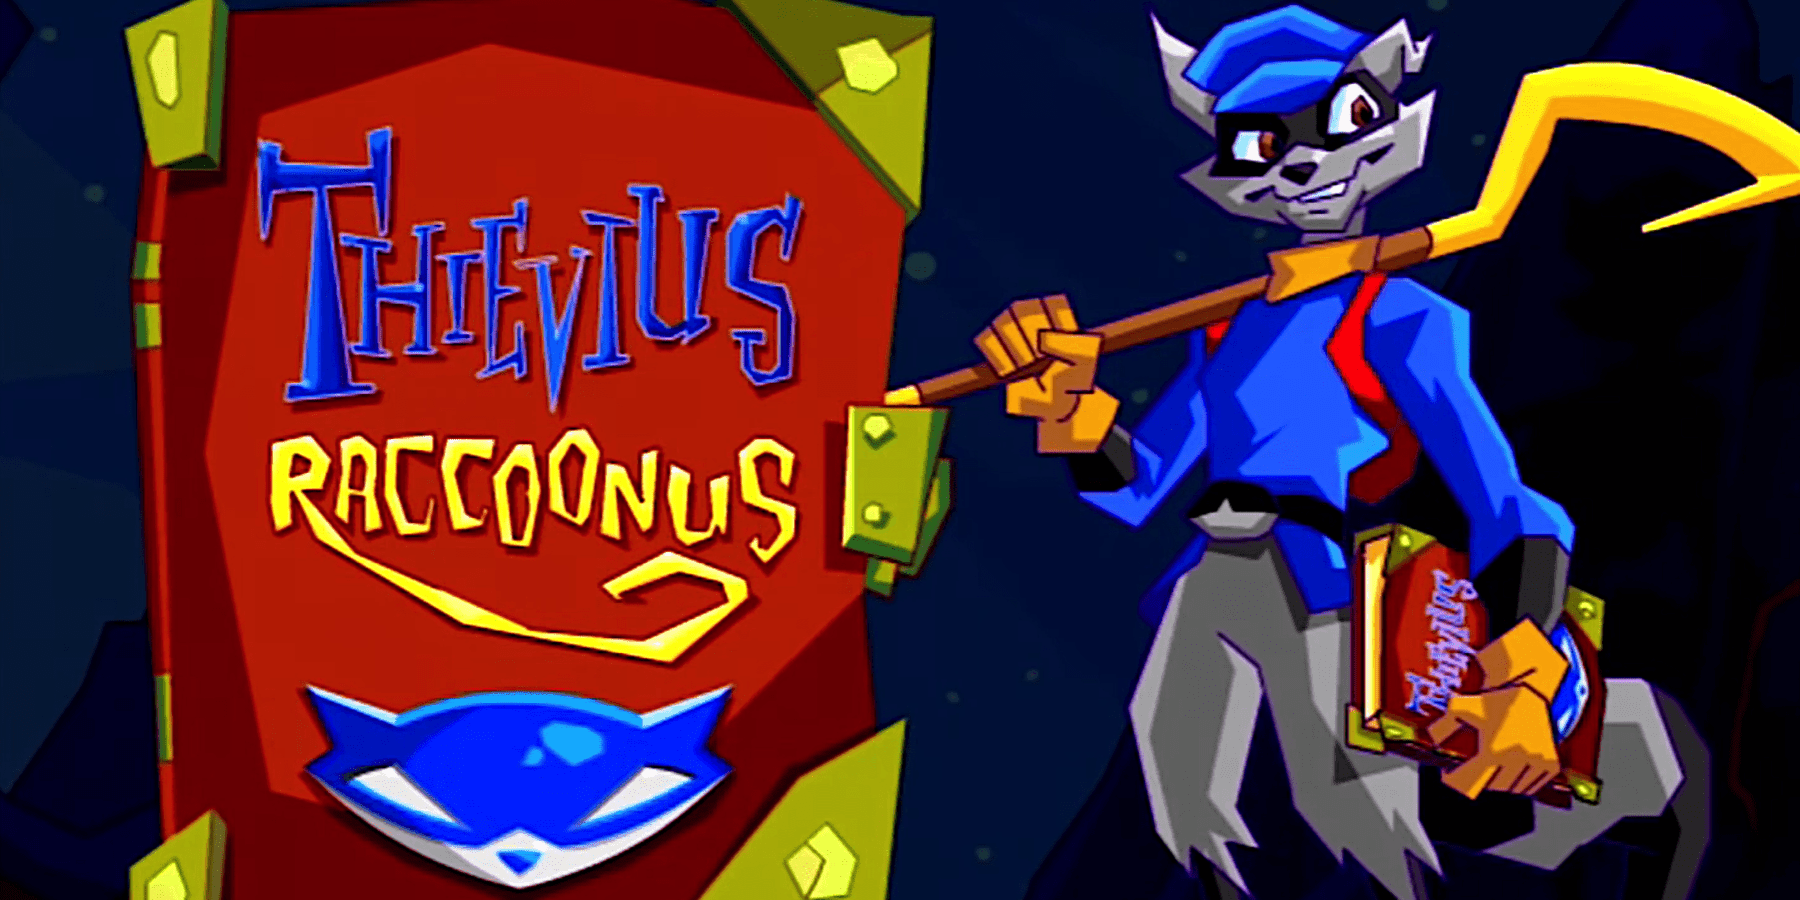 After years of Sly Cooper starvation I finally got around to emulating the  HD collection. It's nice to see the best level of the best game of the  trilogy in HD!!! Makes